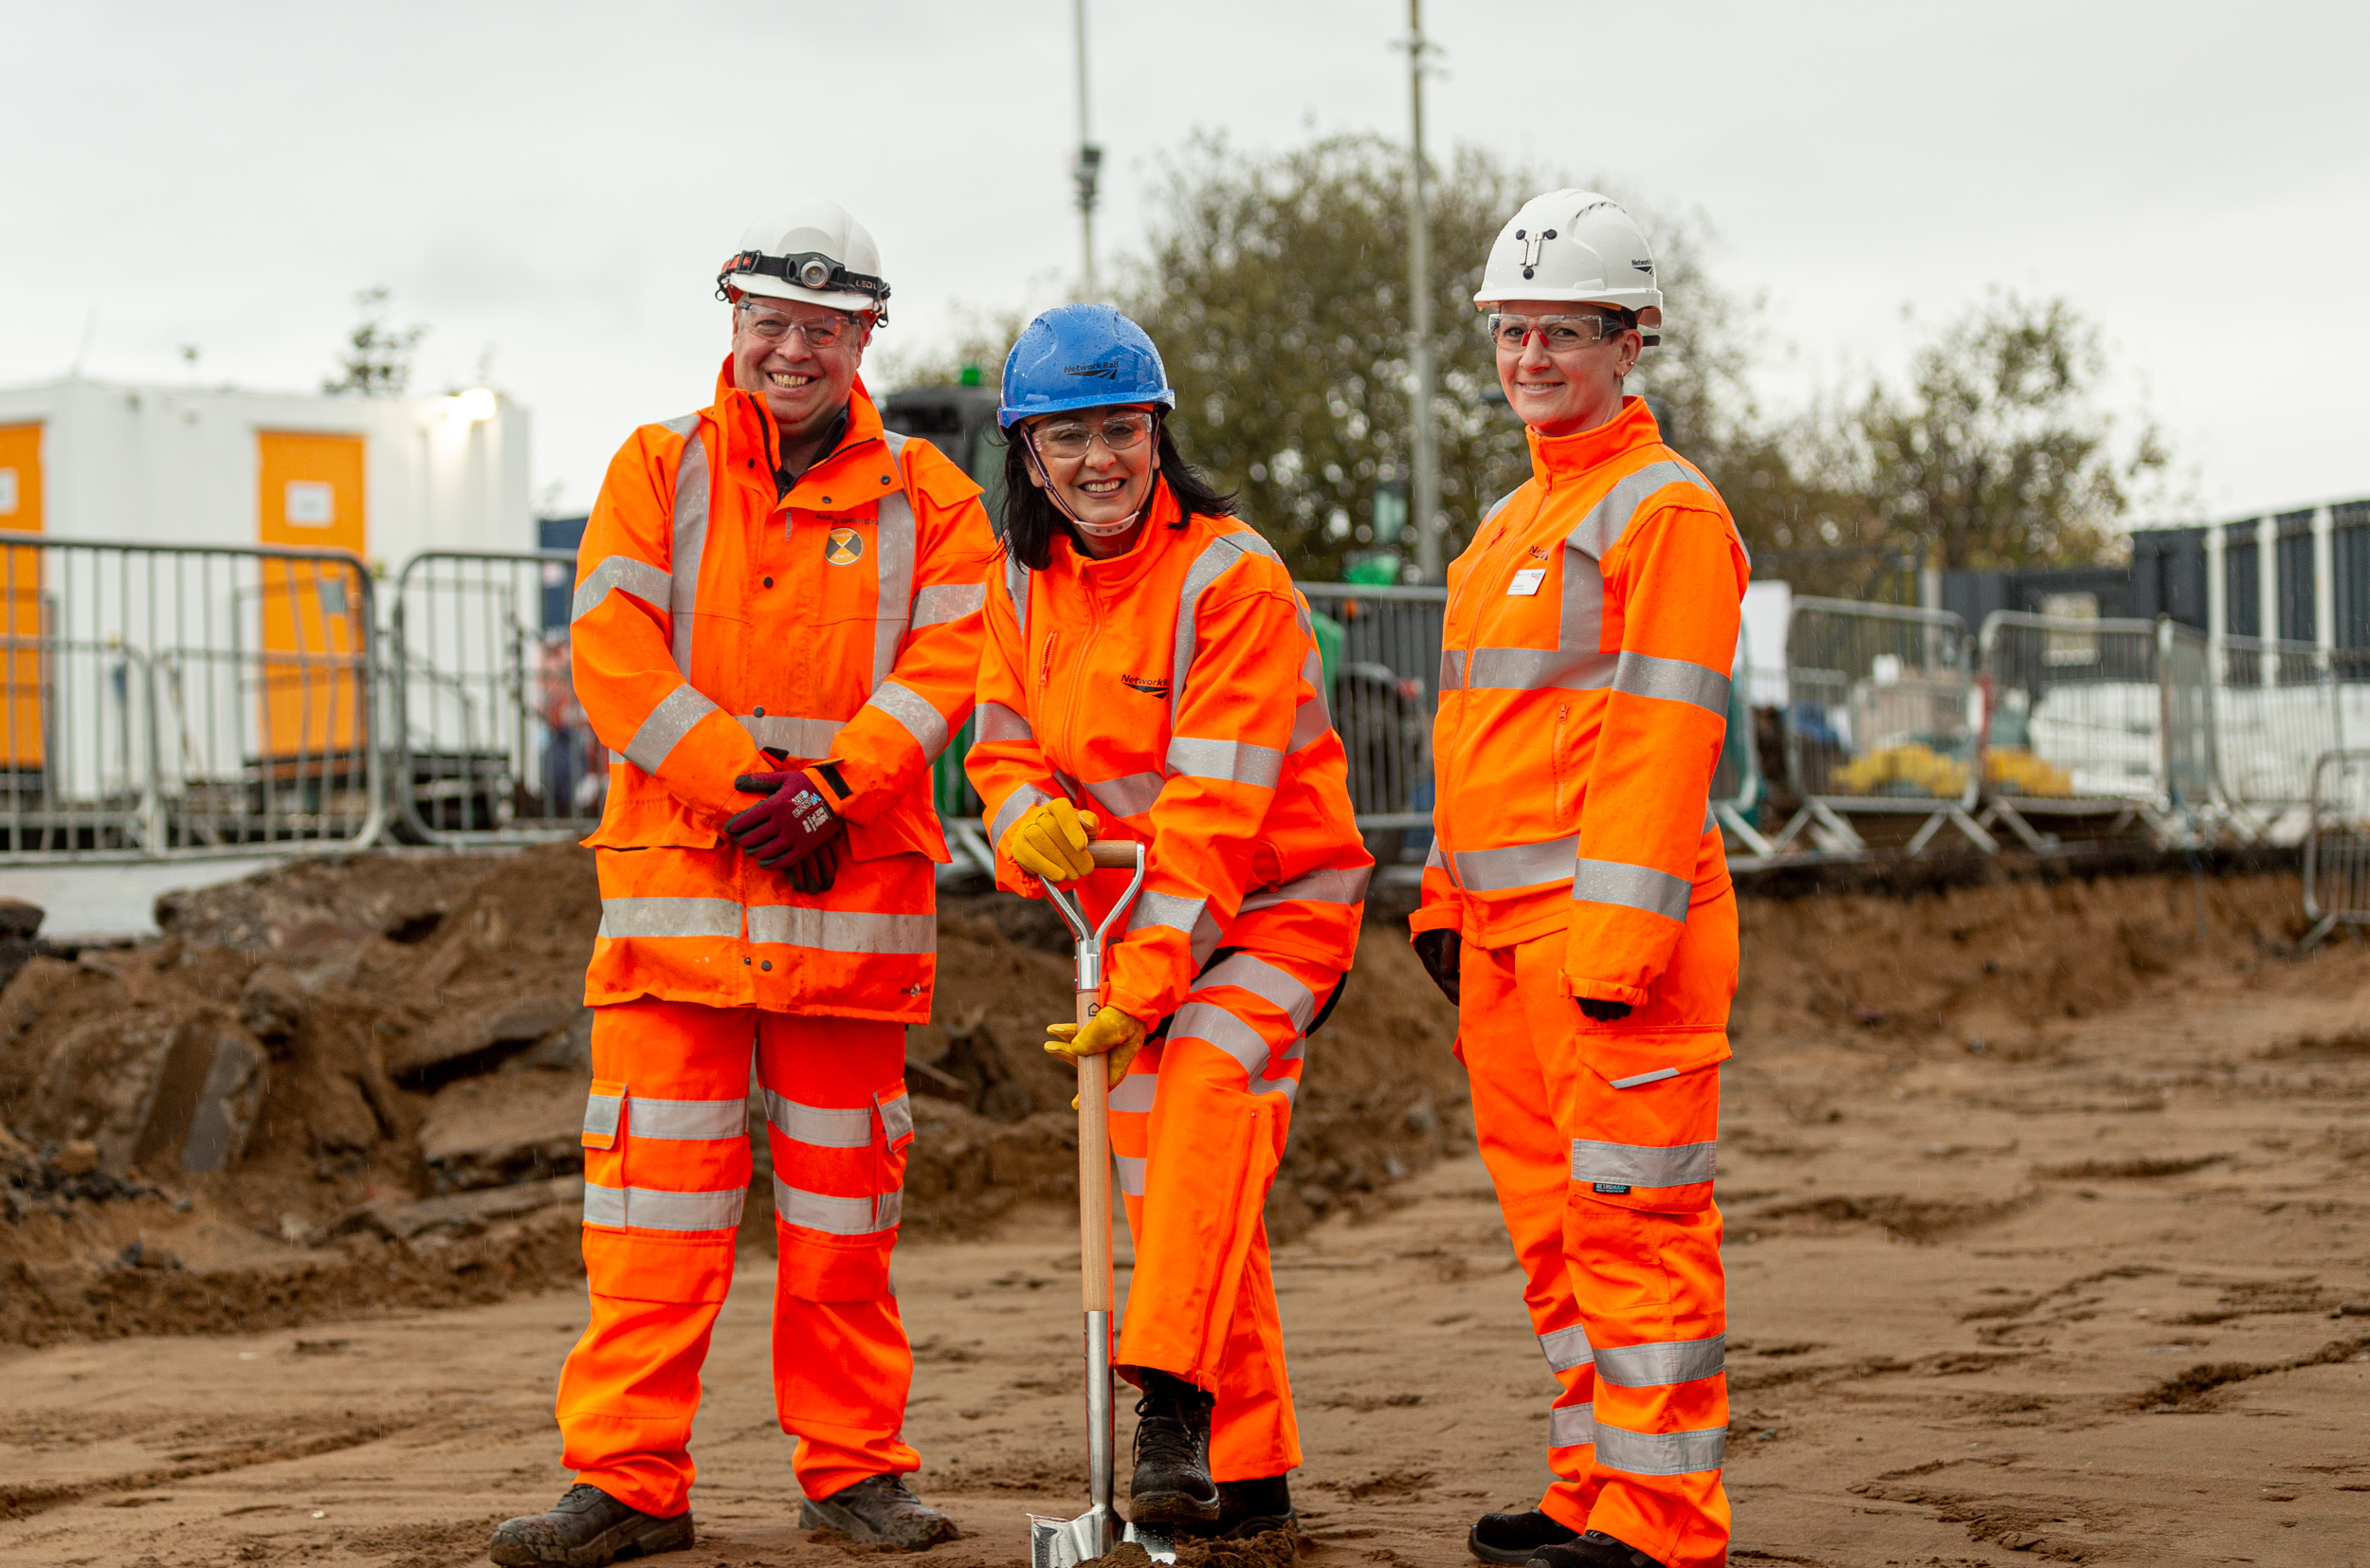 MSP breaks ground at Troon station